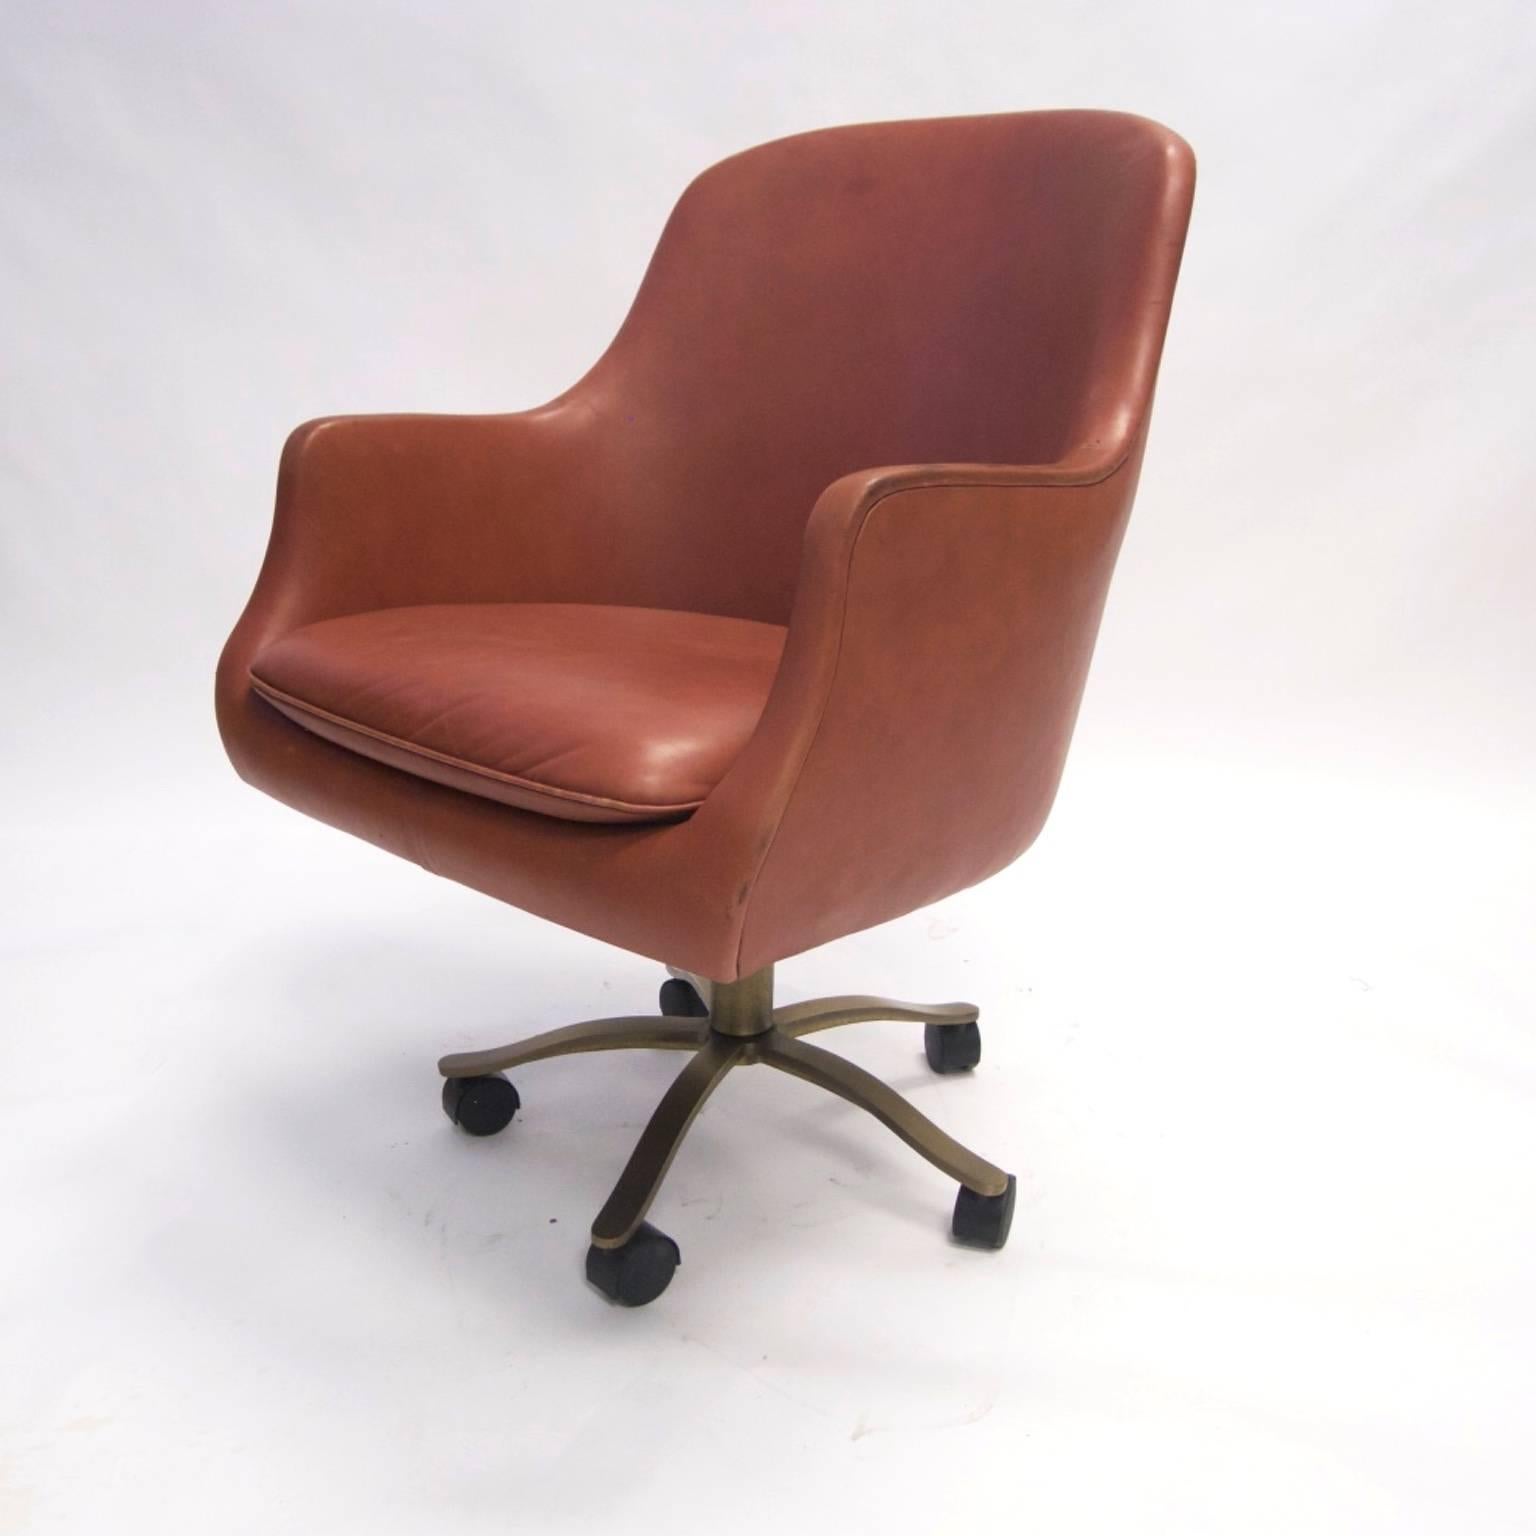 American Nico Zographos Red Leather English Office Desk Chair with Brass Base on Casters